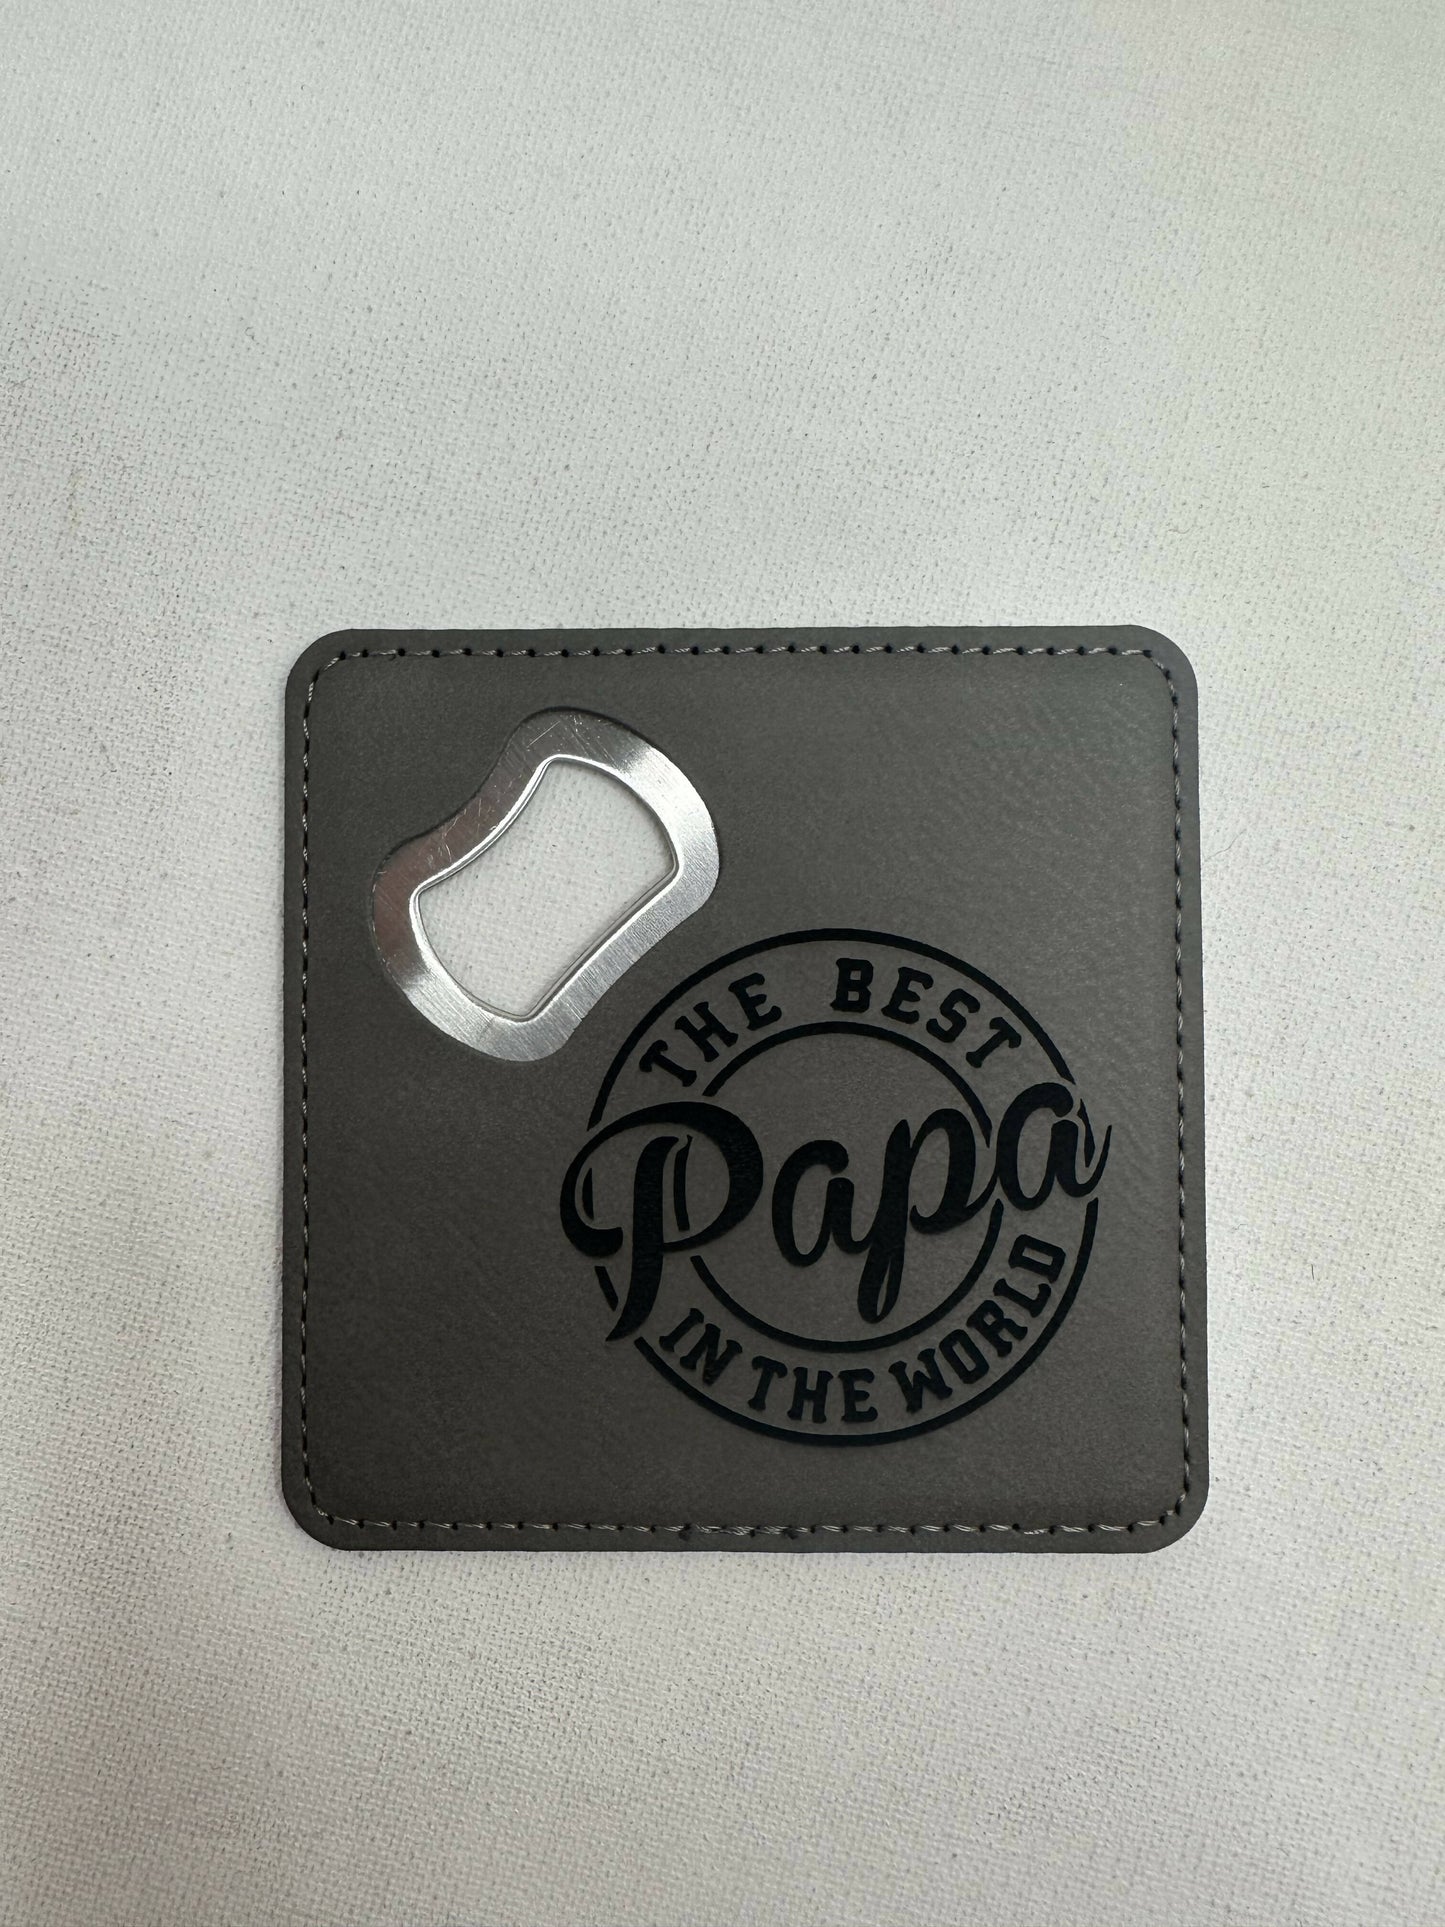 Best papa in the world coaster